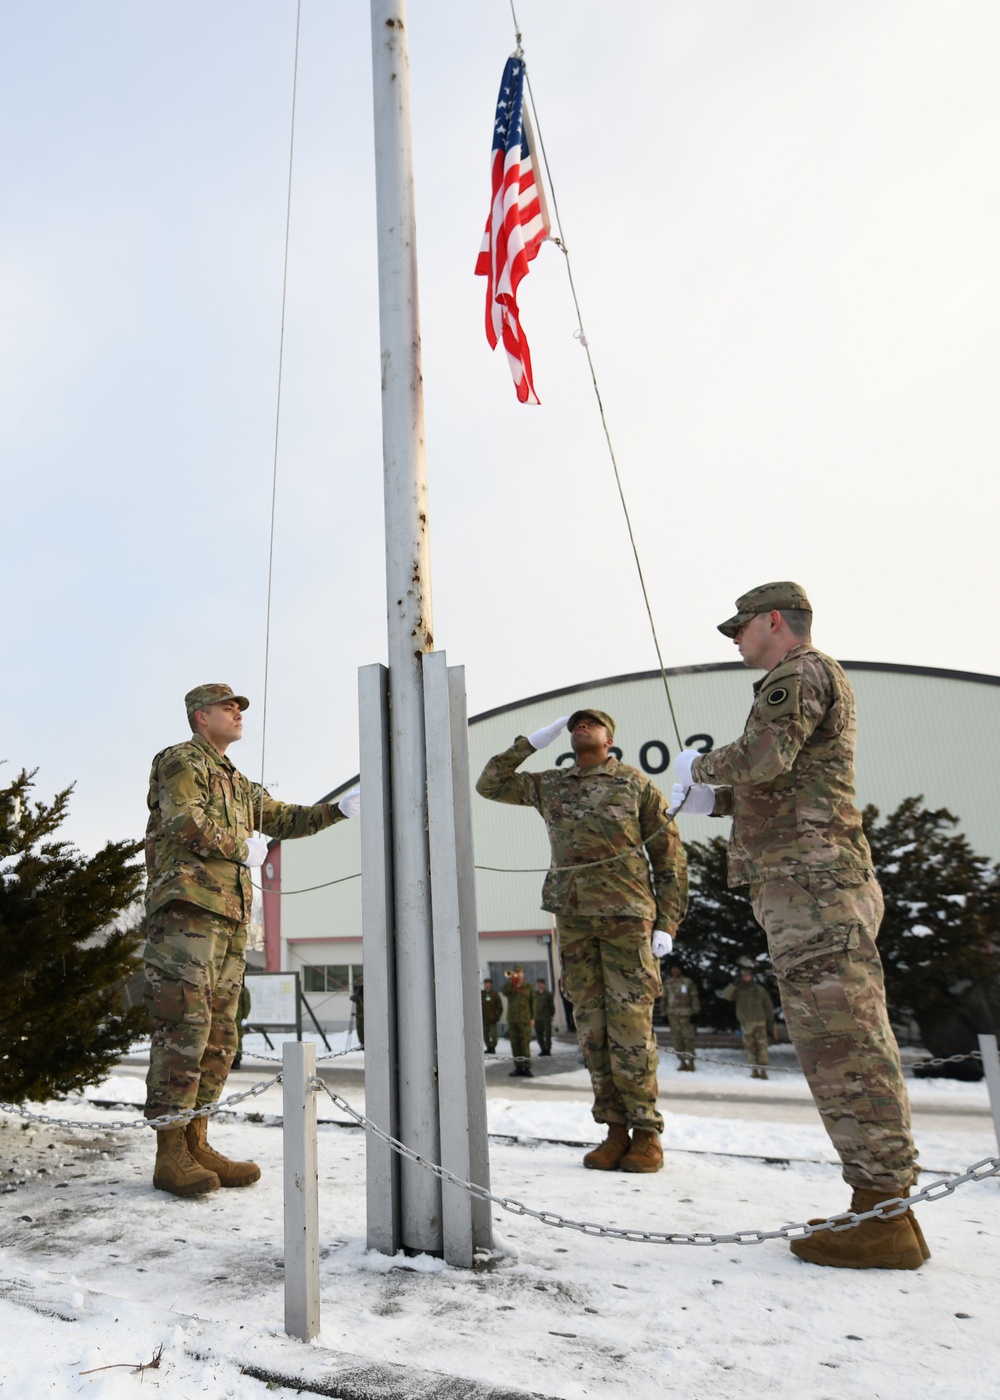 U.S. Army soldiers participate in a flag raising ceremony